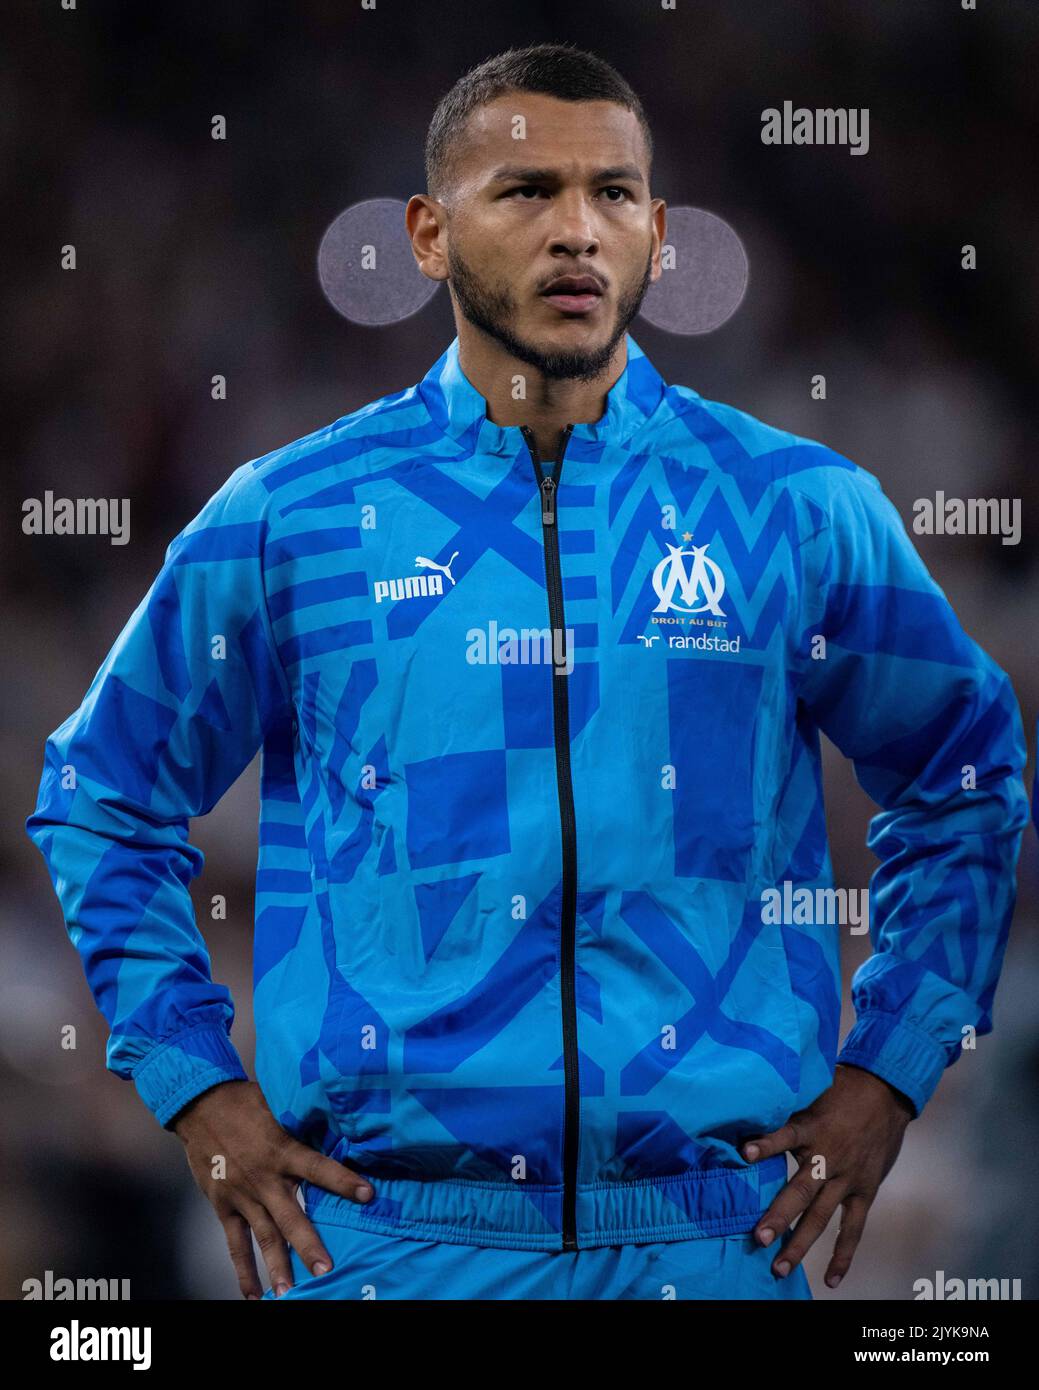 LONDON, ENGLAND - SEPTEMBER 07: Colombian footballer Luis Suarez of Olympique Marseille looks on during the UEFA Champions League group D match betwee Stock Photo